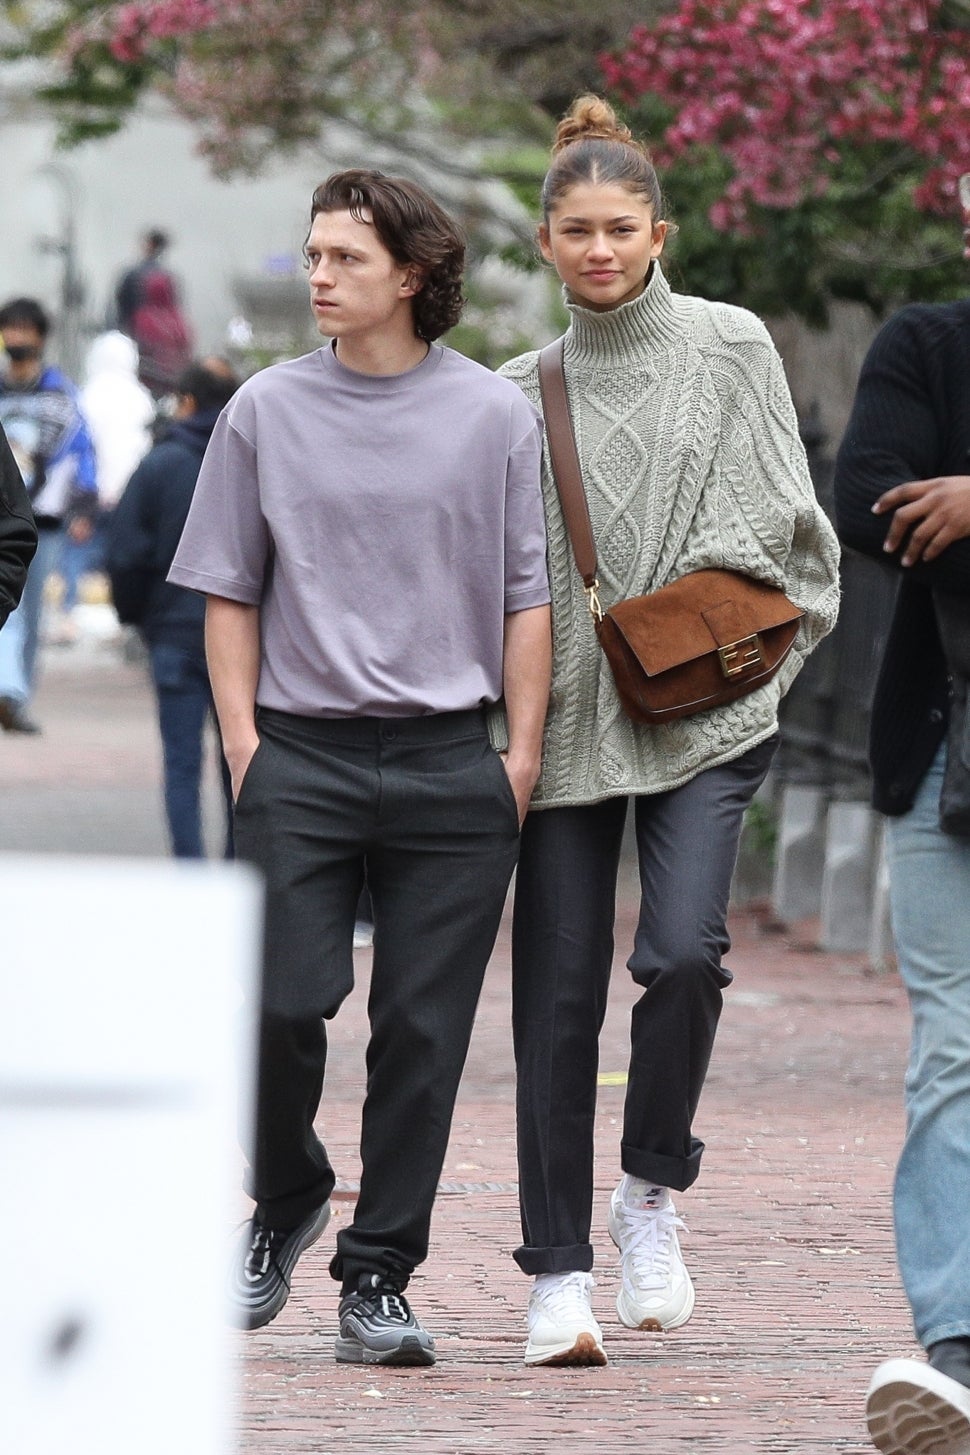 Zendaya and Tom Holland hold hands in Boston